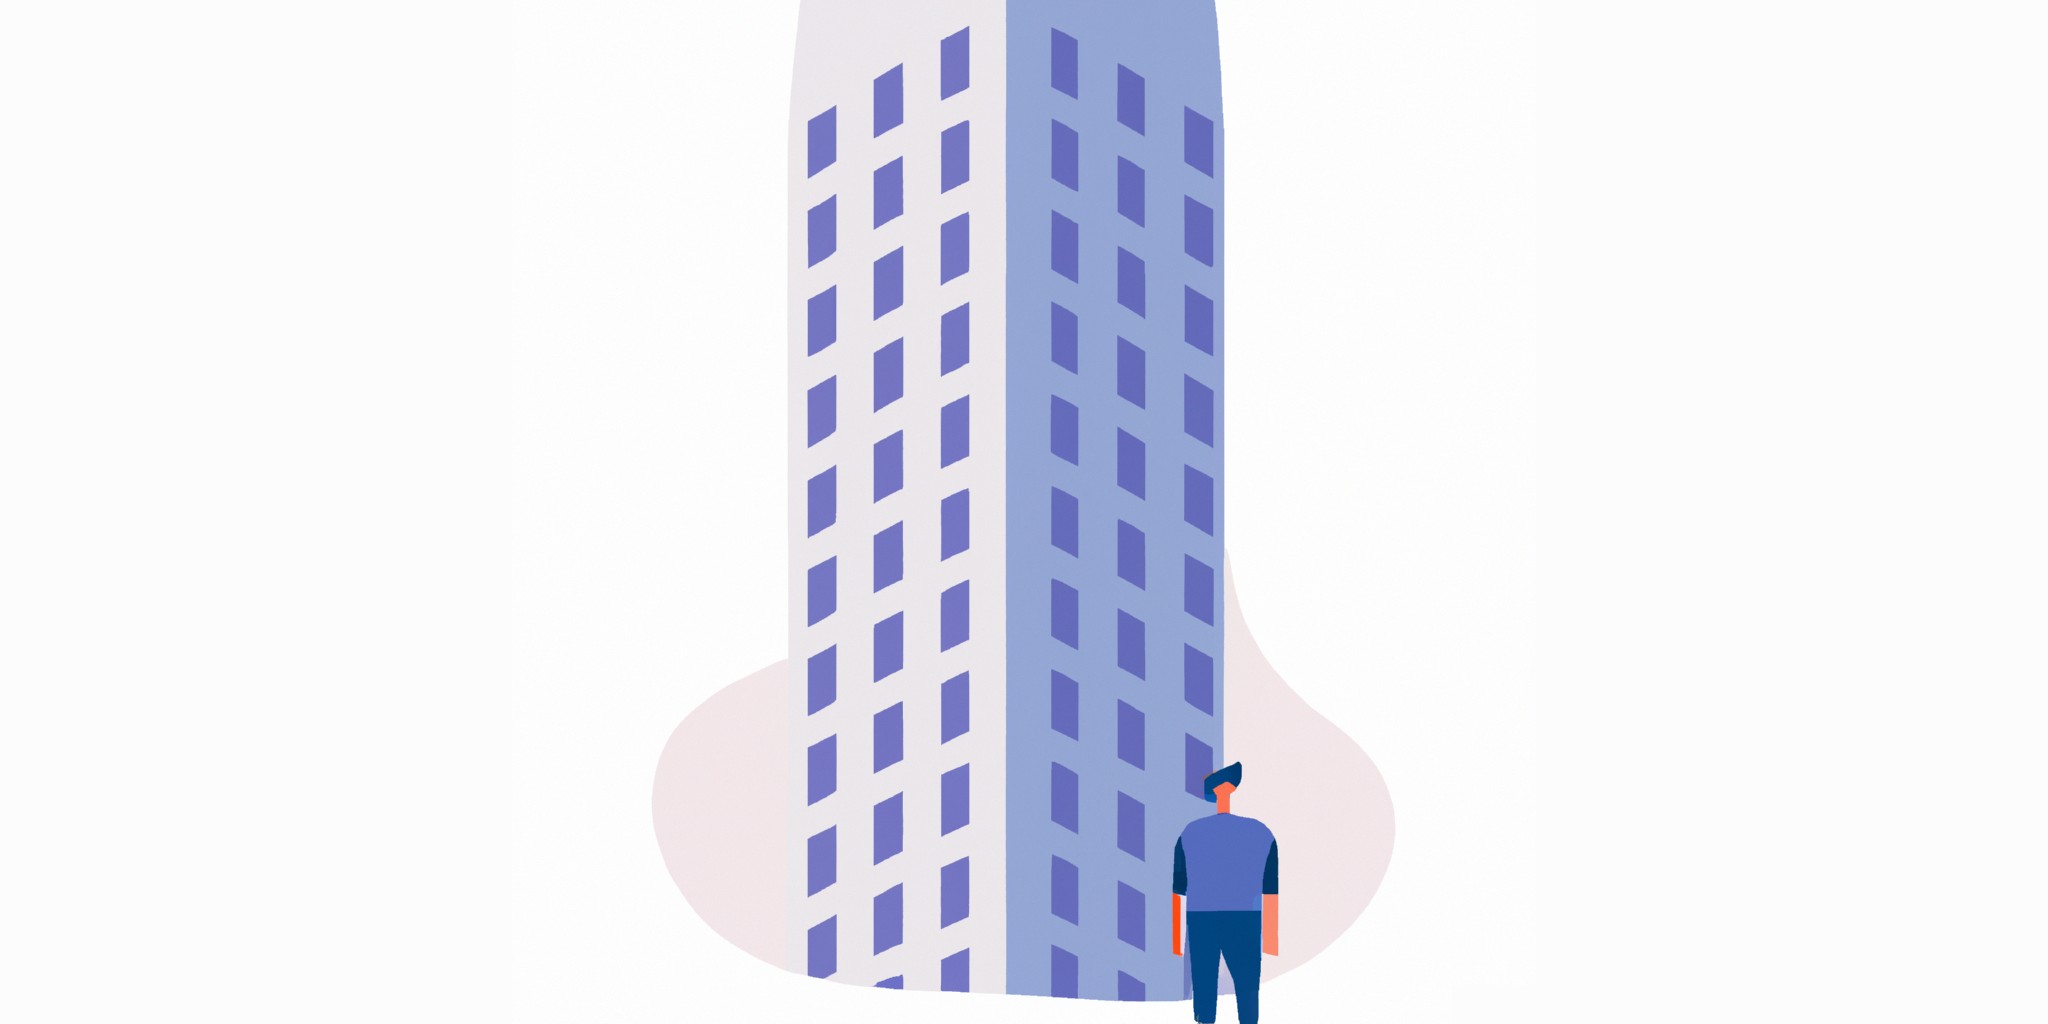 skyscraper with a person in front in flat illustration style with gradients and white background